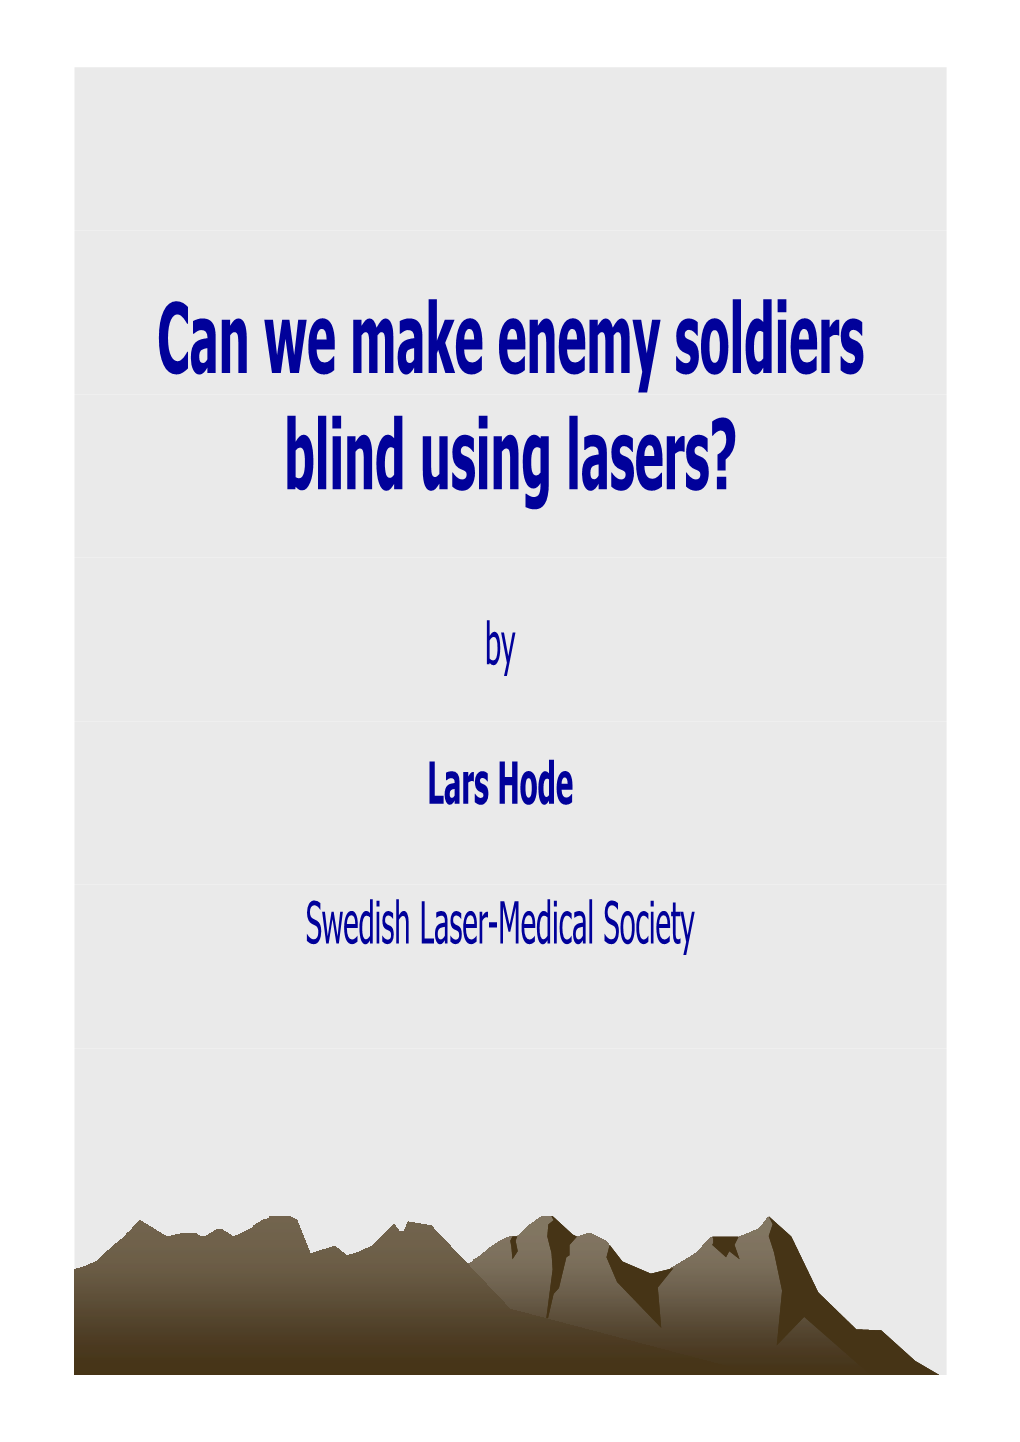 Can We Make Enemy Soldiers Blind Withs Lasers?